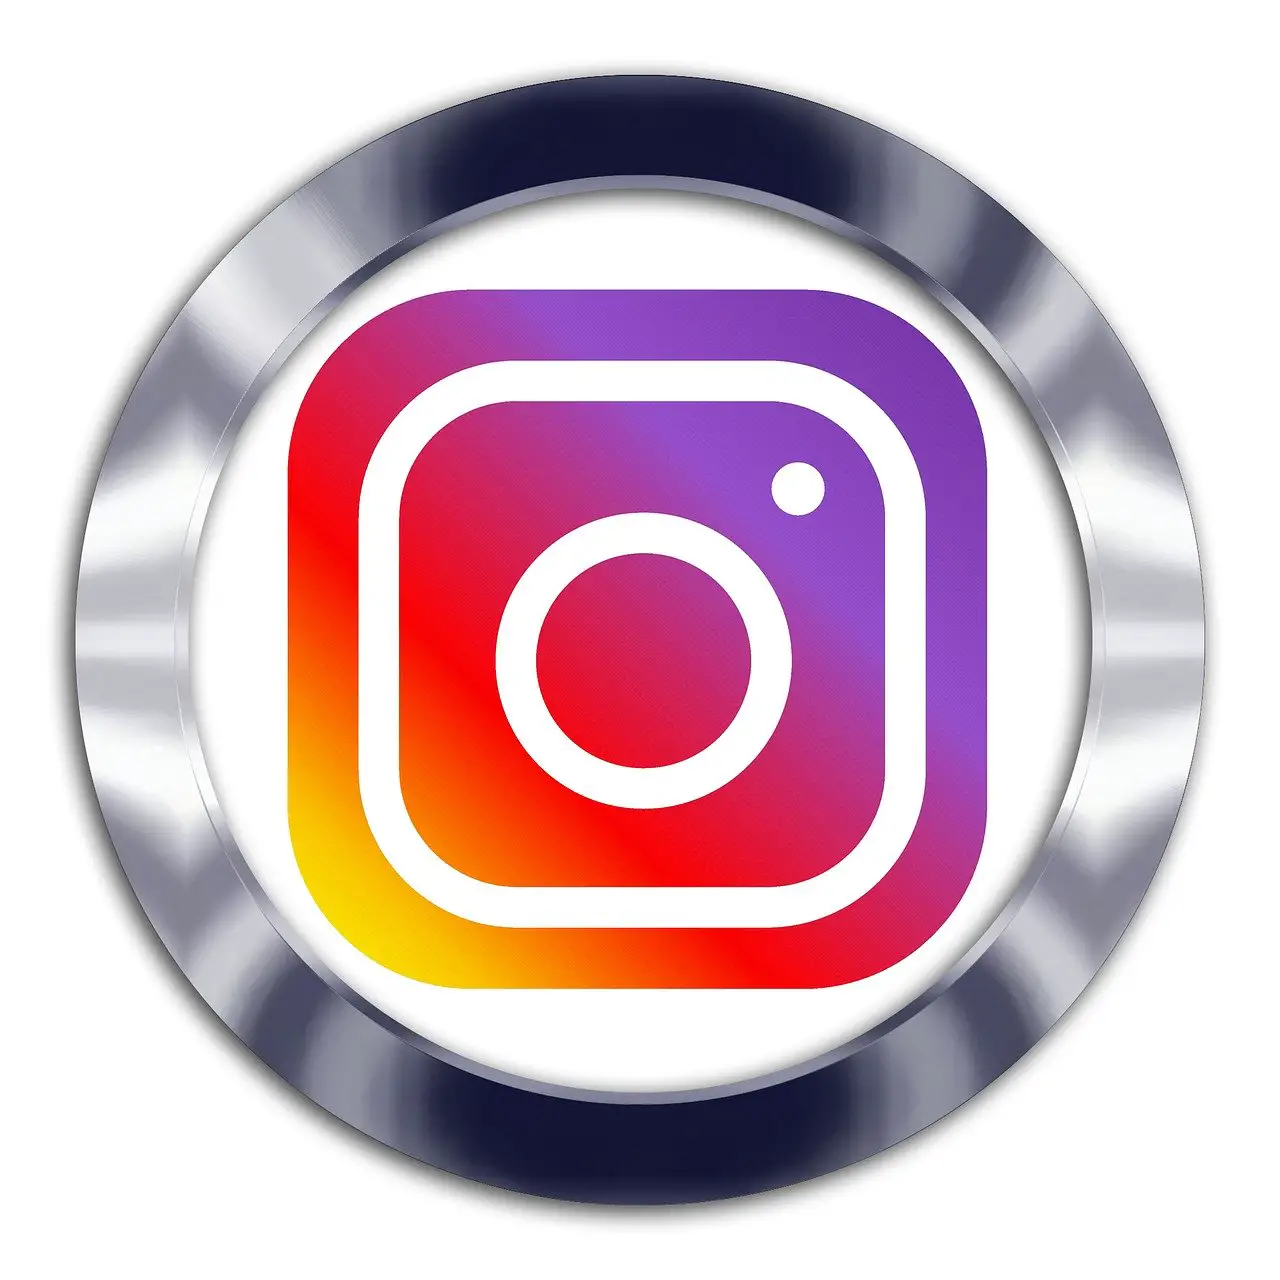 how to download instagram pictures iphone